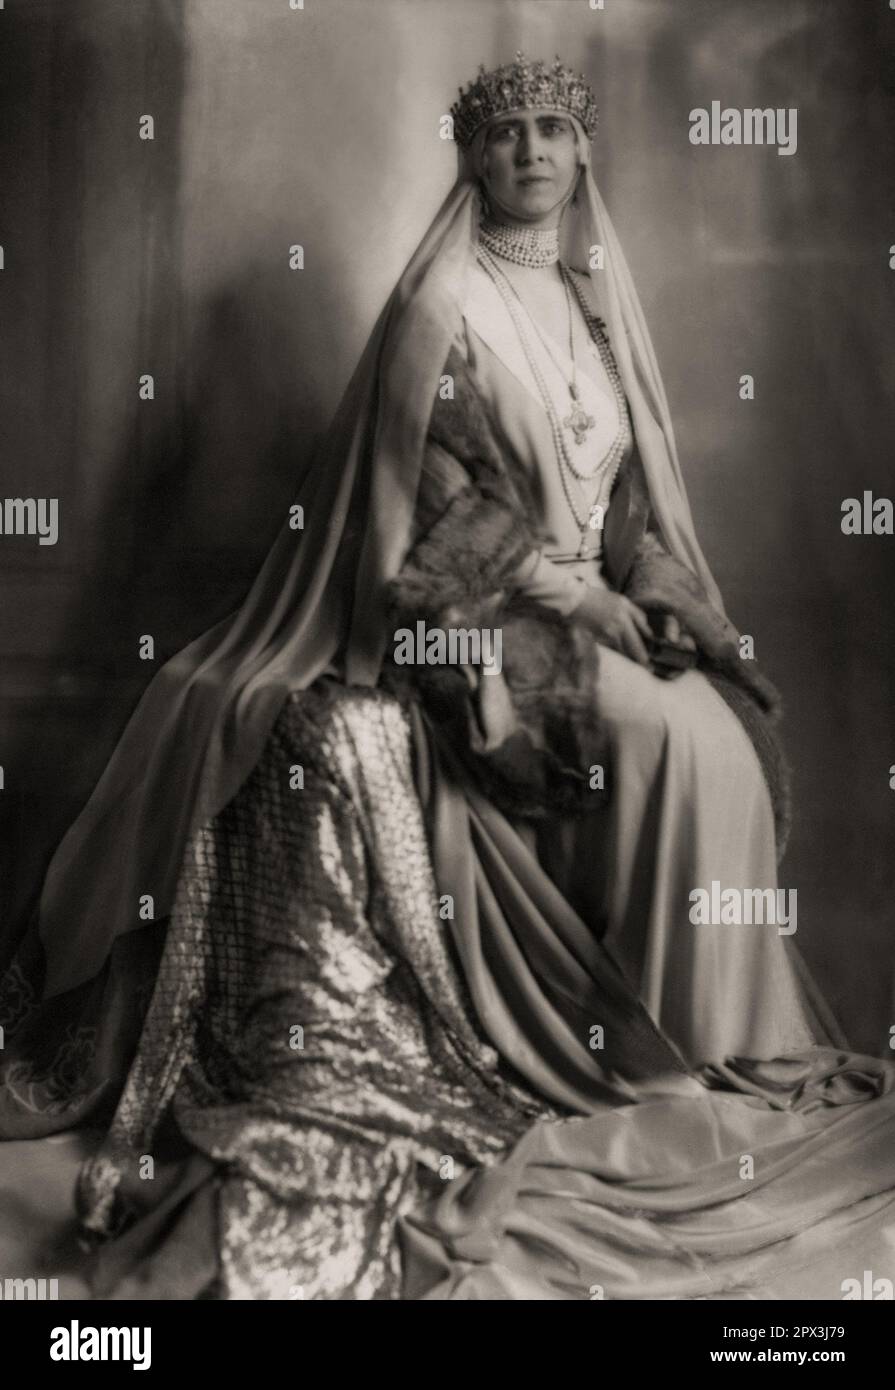 1929 , Roma , ITALY : The Queen SOPHIE Dorothea Ulrike of GREECE ( 1870 - 1932 ), born princess of PRUSSIA of Greece and Denmark , sister of Kaiser Wilhelm II of Germany , married with KING of GREECE KONSTANTINOS I ( Costantine , 1868 - 1923 ). Was the mother of 3 Kings of Greece ( GIORGIOS II  , ALEXANDROS I and PAULOS I ) and princess Irene ( 1904 - 1974 ) married to italian prince Aimone of SAVOIA AOSTA Duke of SPOLETO . Photo by EVA BARRETT ( 1879 - 1950 ).  - GRECIA - House of SCHLESWIG HOLSTEIN SONDERBURG GLUCKSBURG  - COSTANTINO - SOPHIA - SOFIA - REGINA - HISTORY - FOTO STORICHE - port Stock Photo